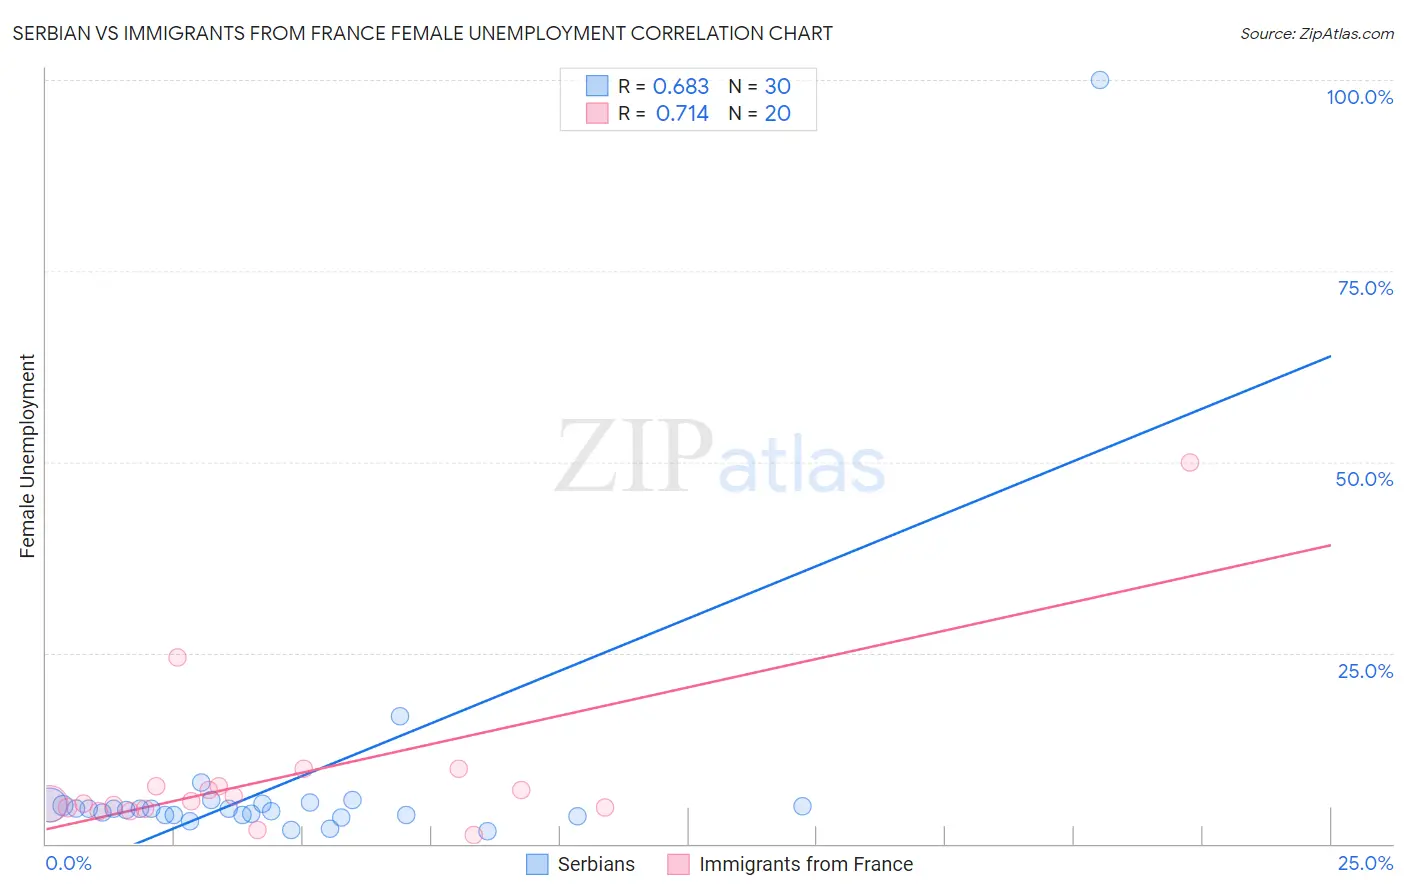 Serbian vs Immigrants from France Female Unemployment